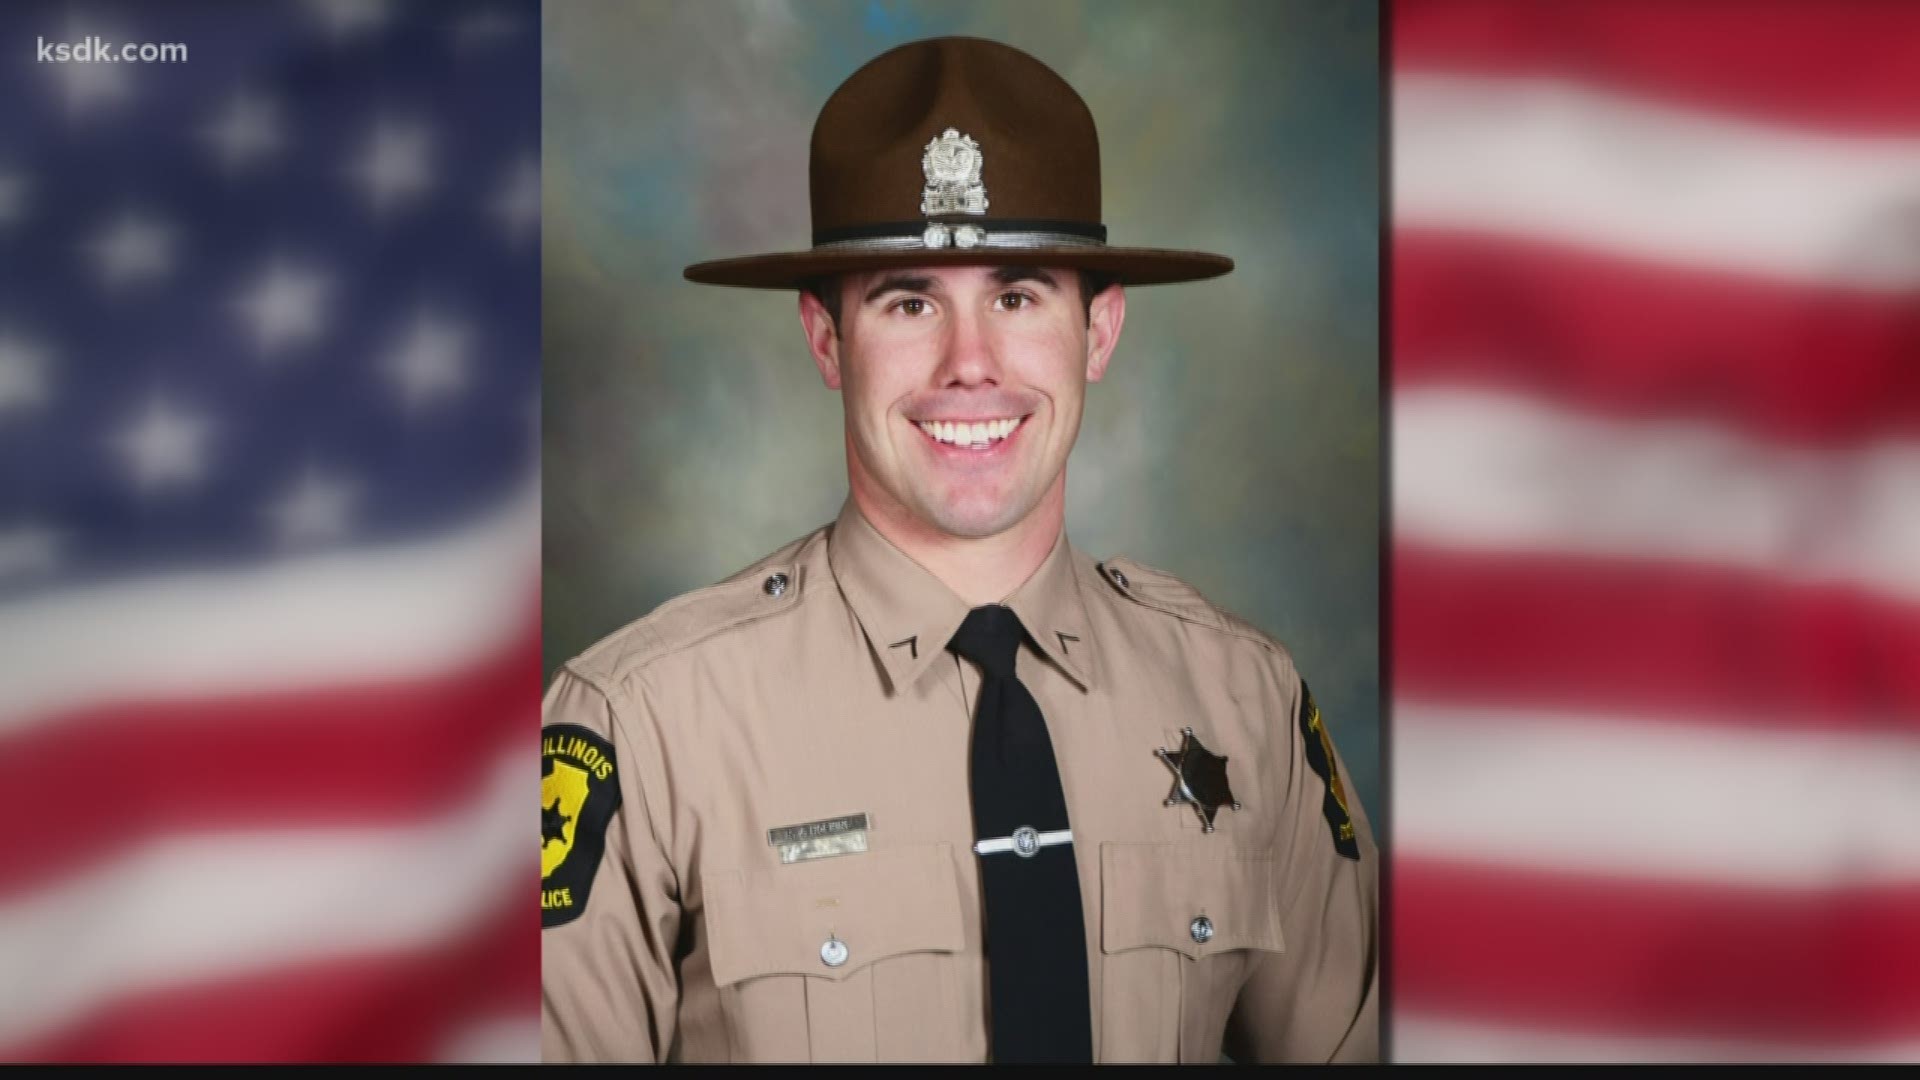 Trooper Nick Hopkins was taken to the hospital with life-threatening injuries and died at around 6:10 p.m.